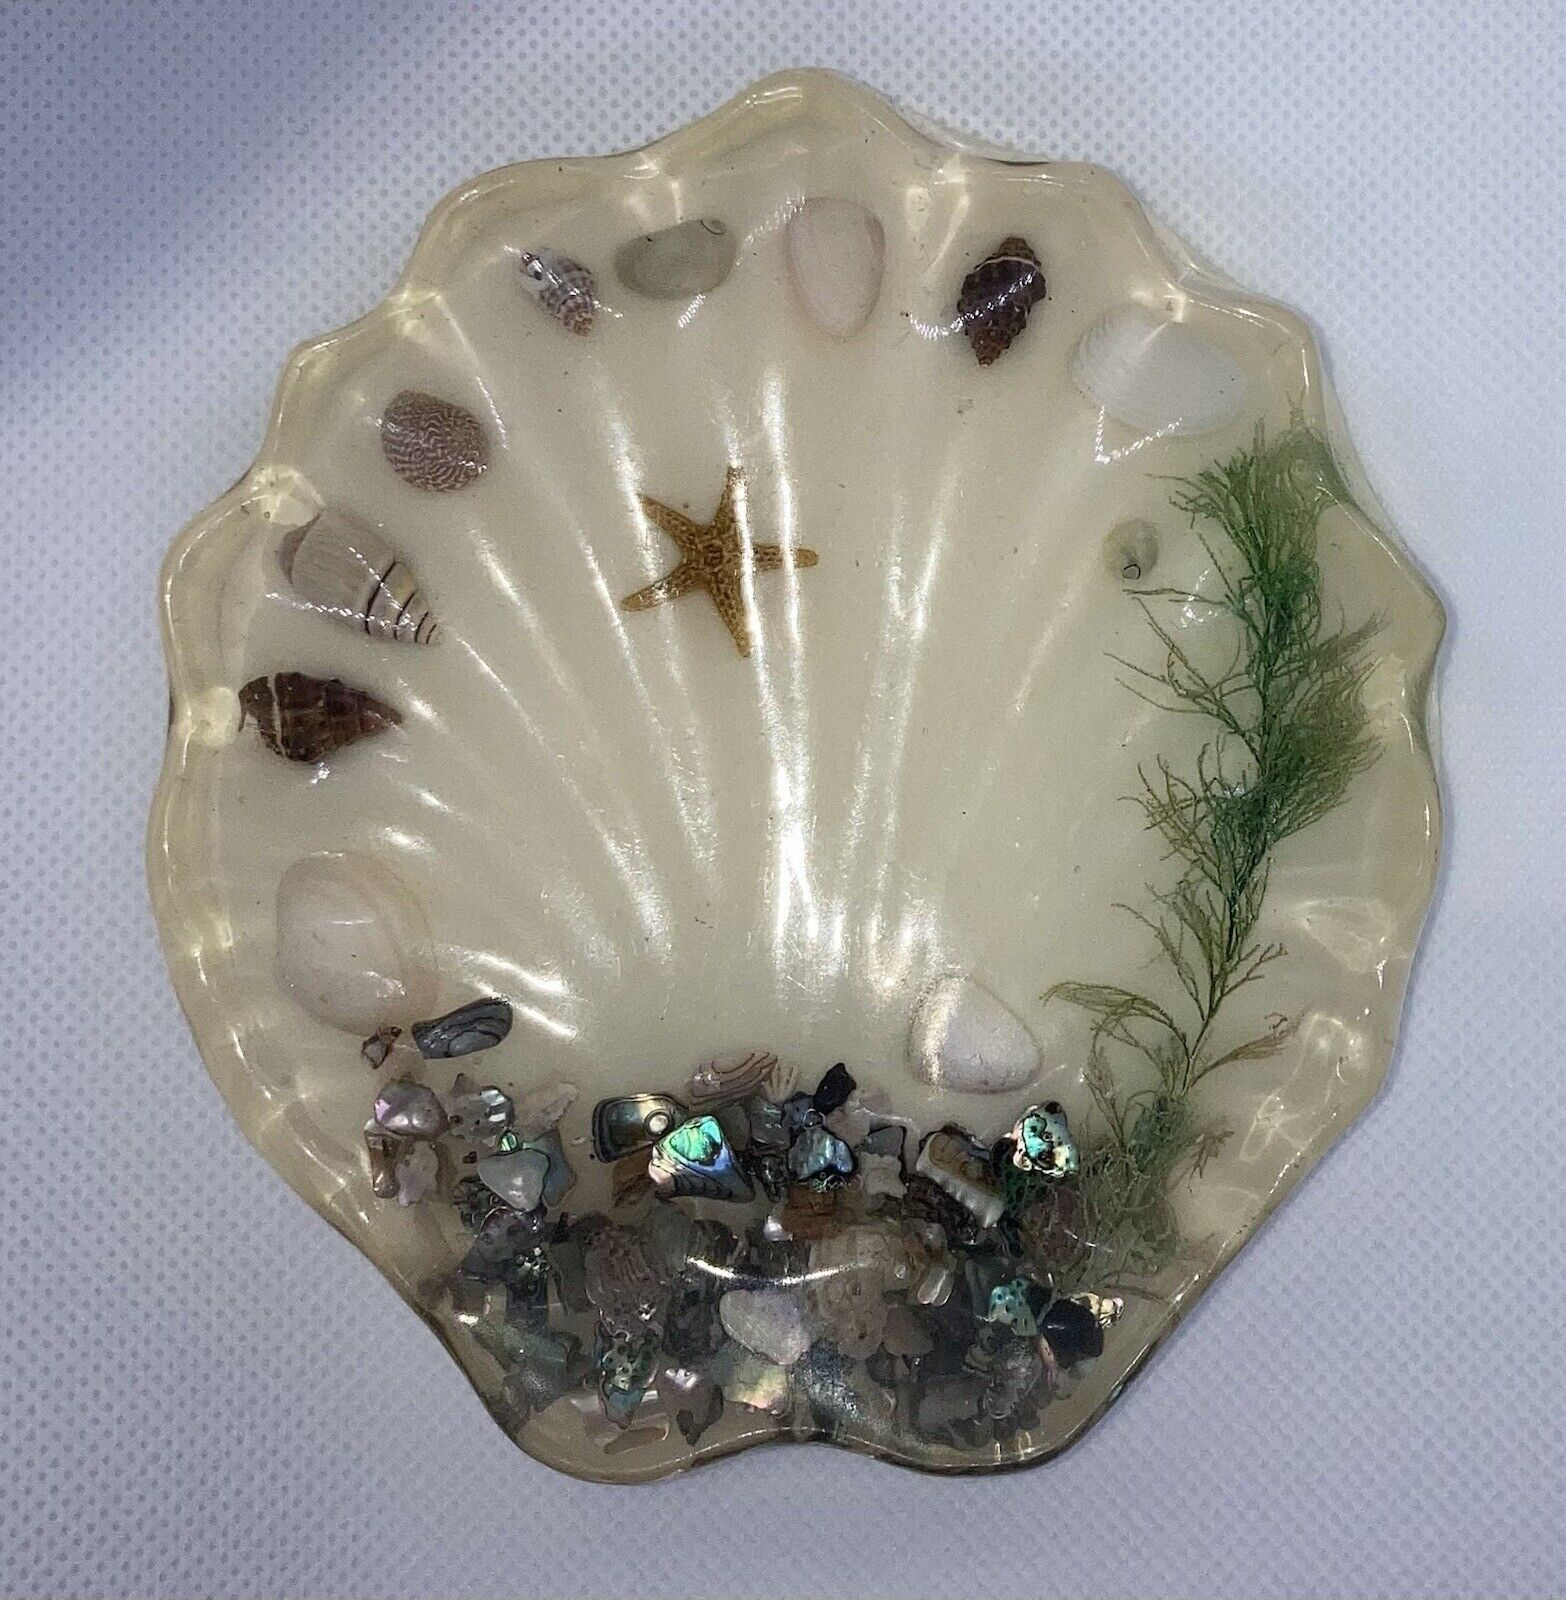 Vintage “Vomit” Sea Shell shaped Retro Lucite resin soap dish-trinket tray MCM